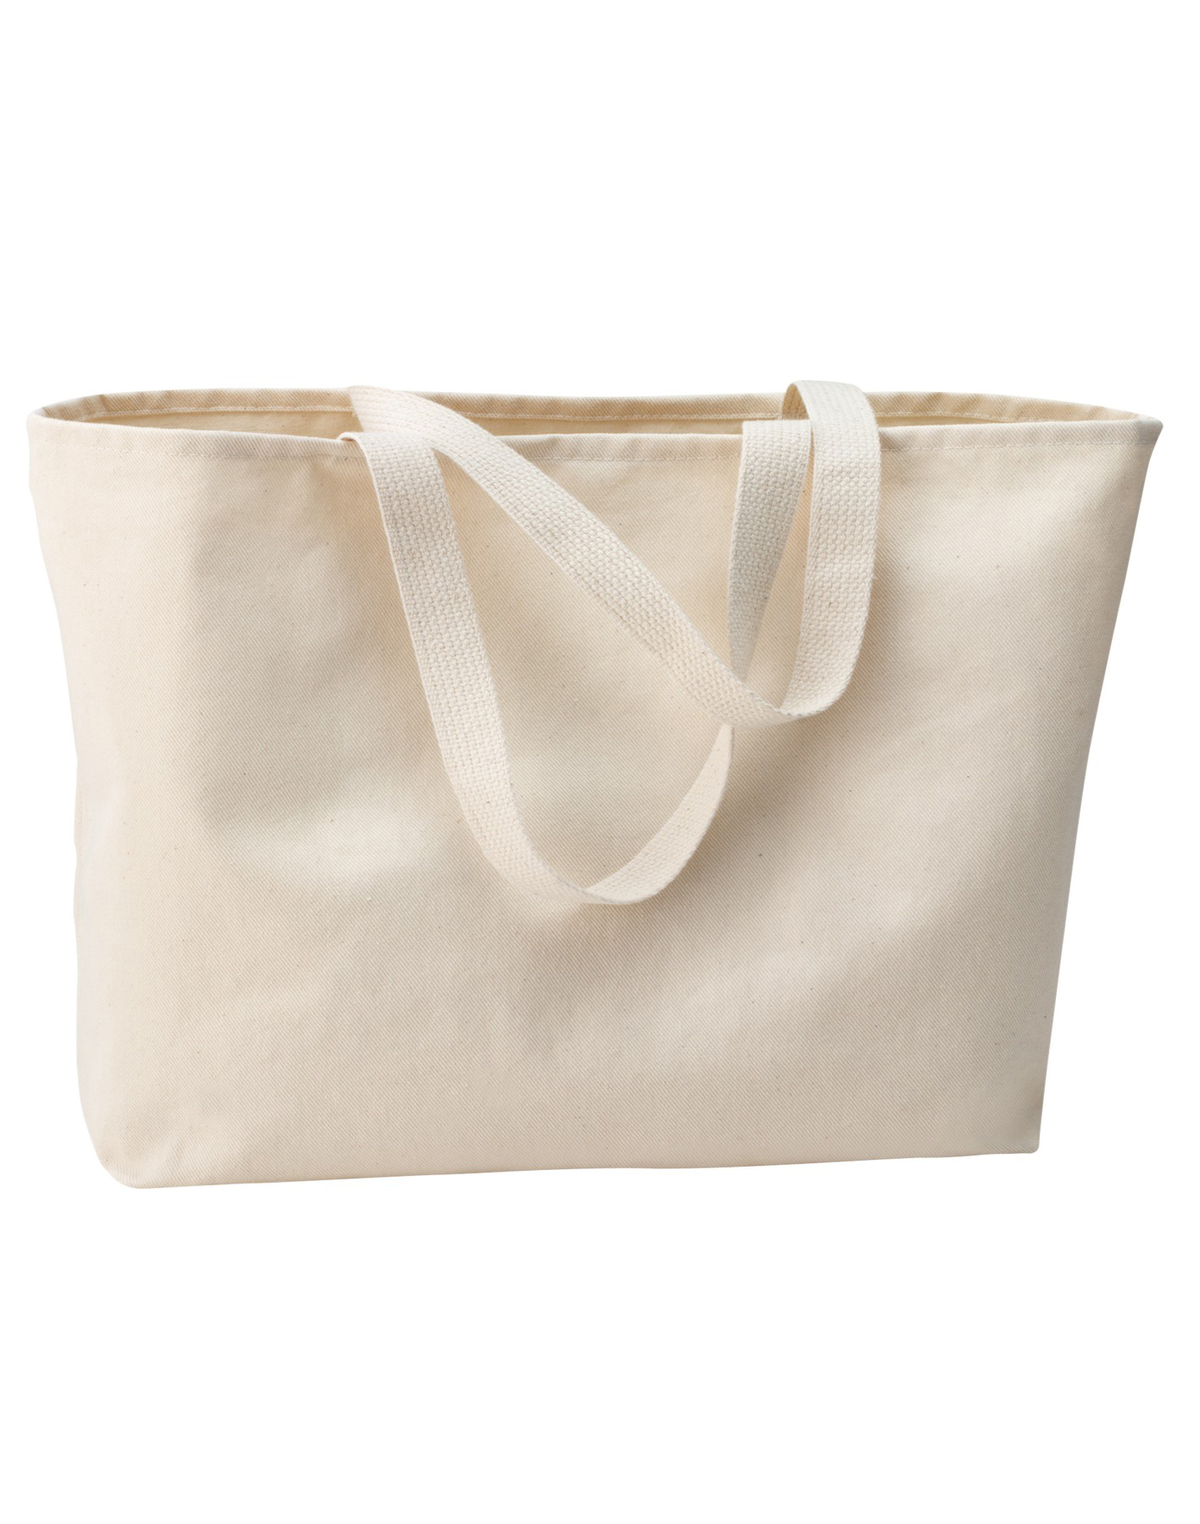 hybrid at home Nautical Ideal Twill Jumbo Tote | Product | Port Authority - Port Authority